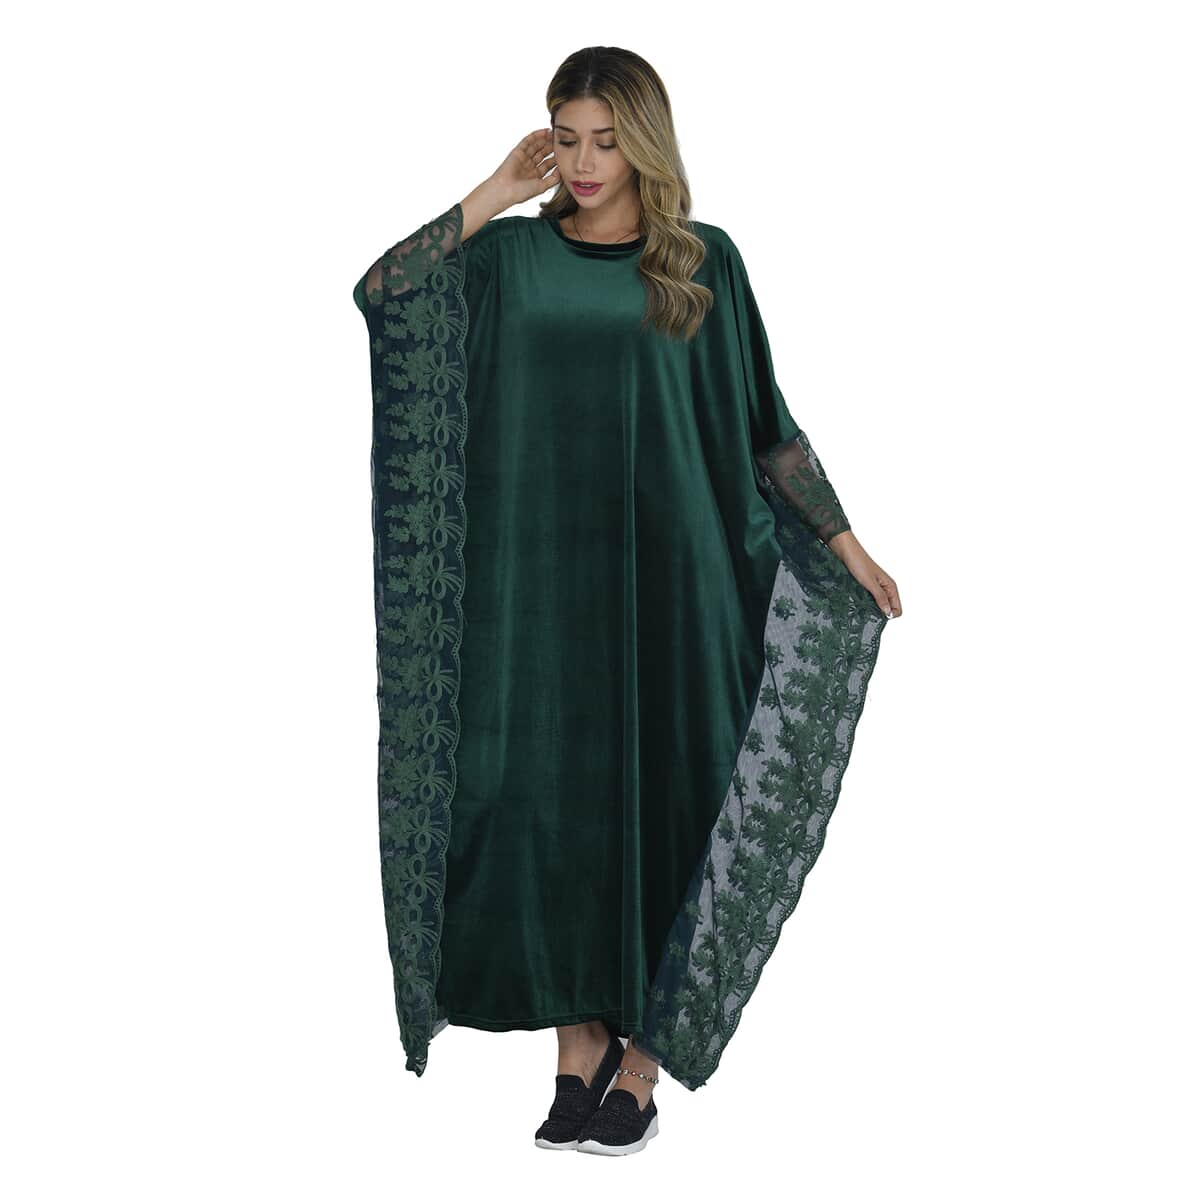 Tamsy Black Label - Lux Stretch Velvet Kaftan with Lace in Emerald Green - One Size Fits Most image number 0